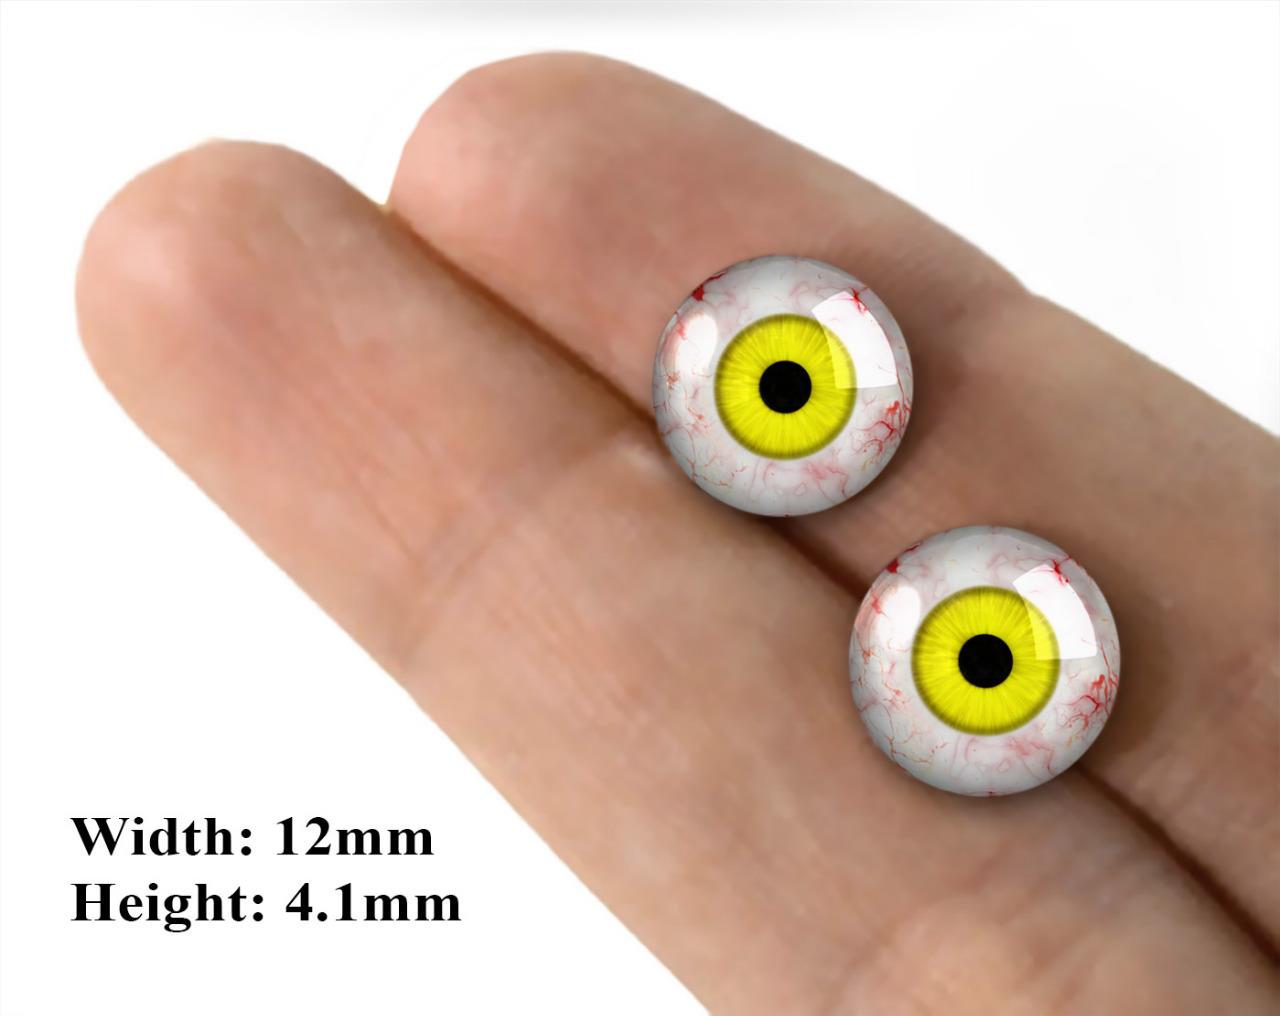 Black and Yellow Zombie Monster Glass Eyes – Handmade Glass Eyes